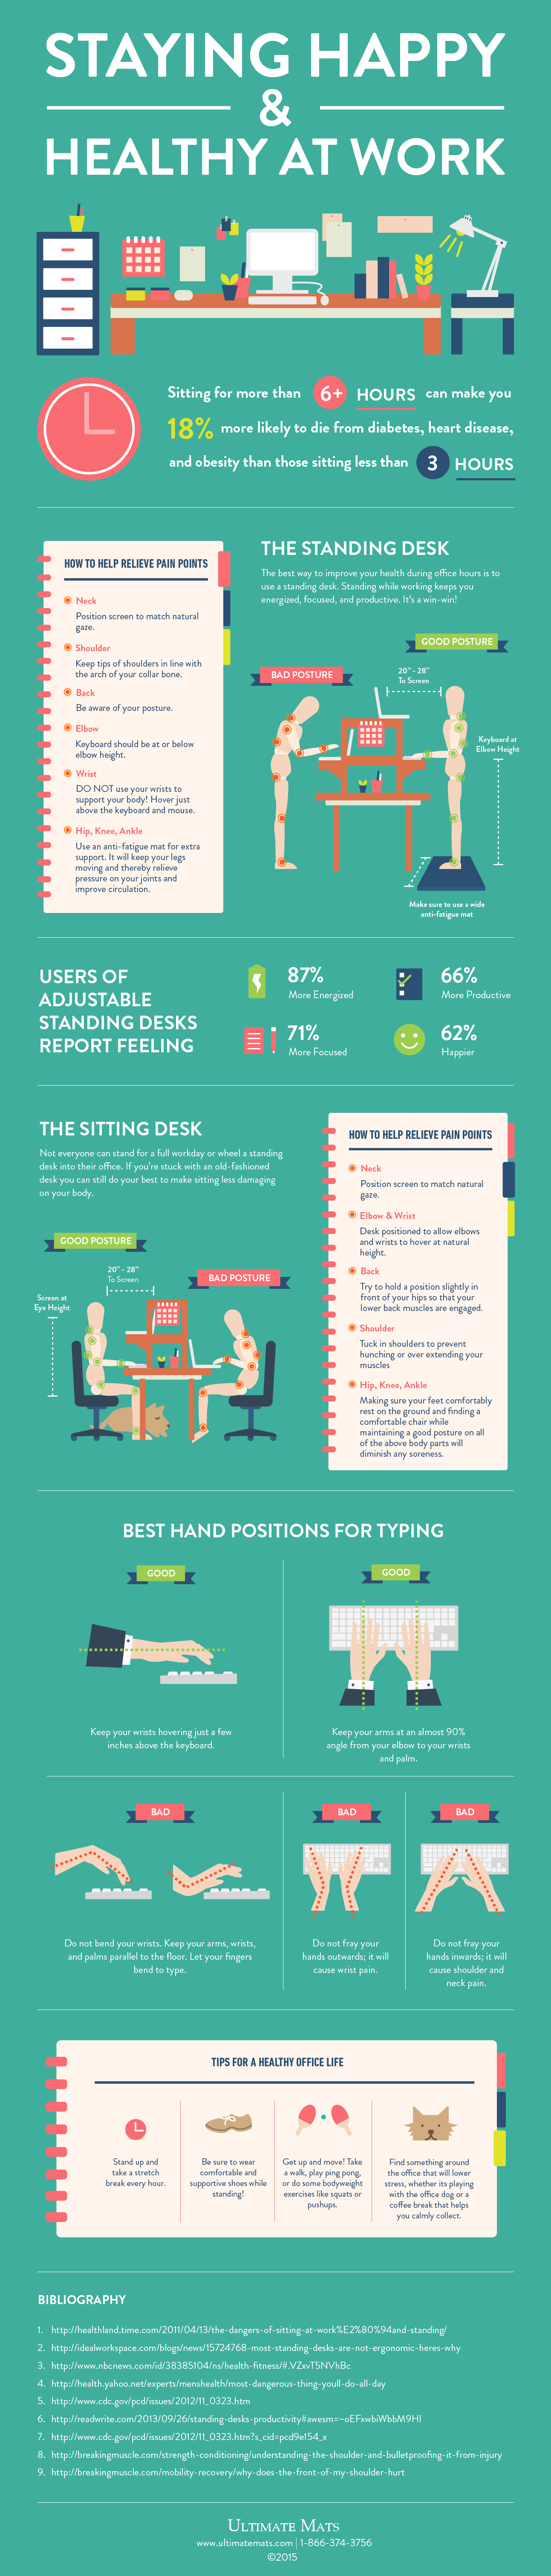 Standing & Desk Ergonomics: Hacking Your Workspace to Stay Comfortable